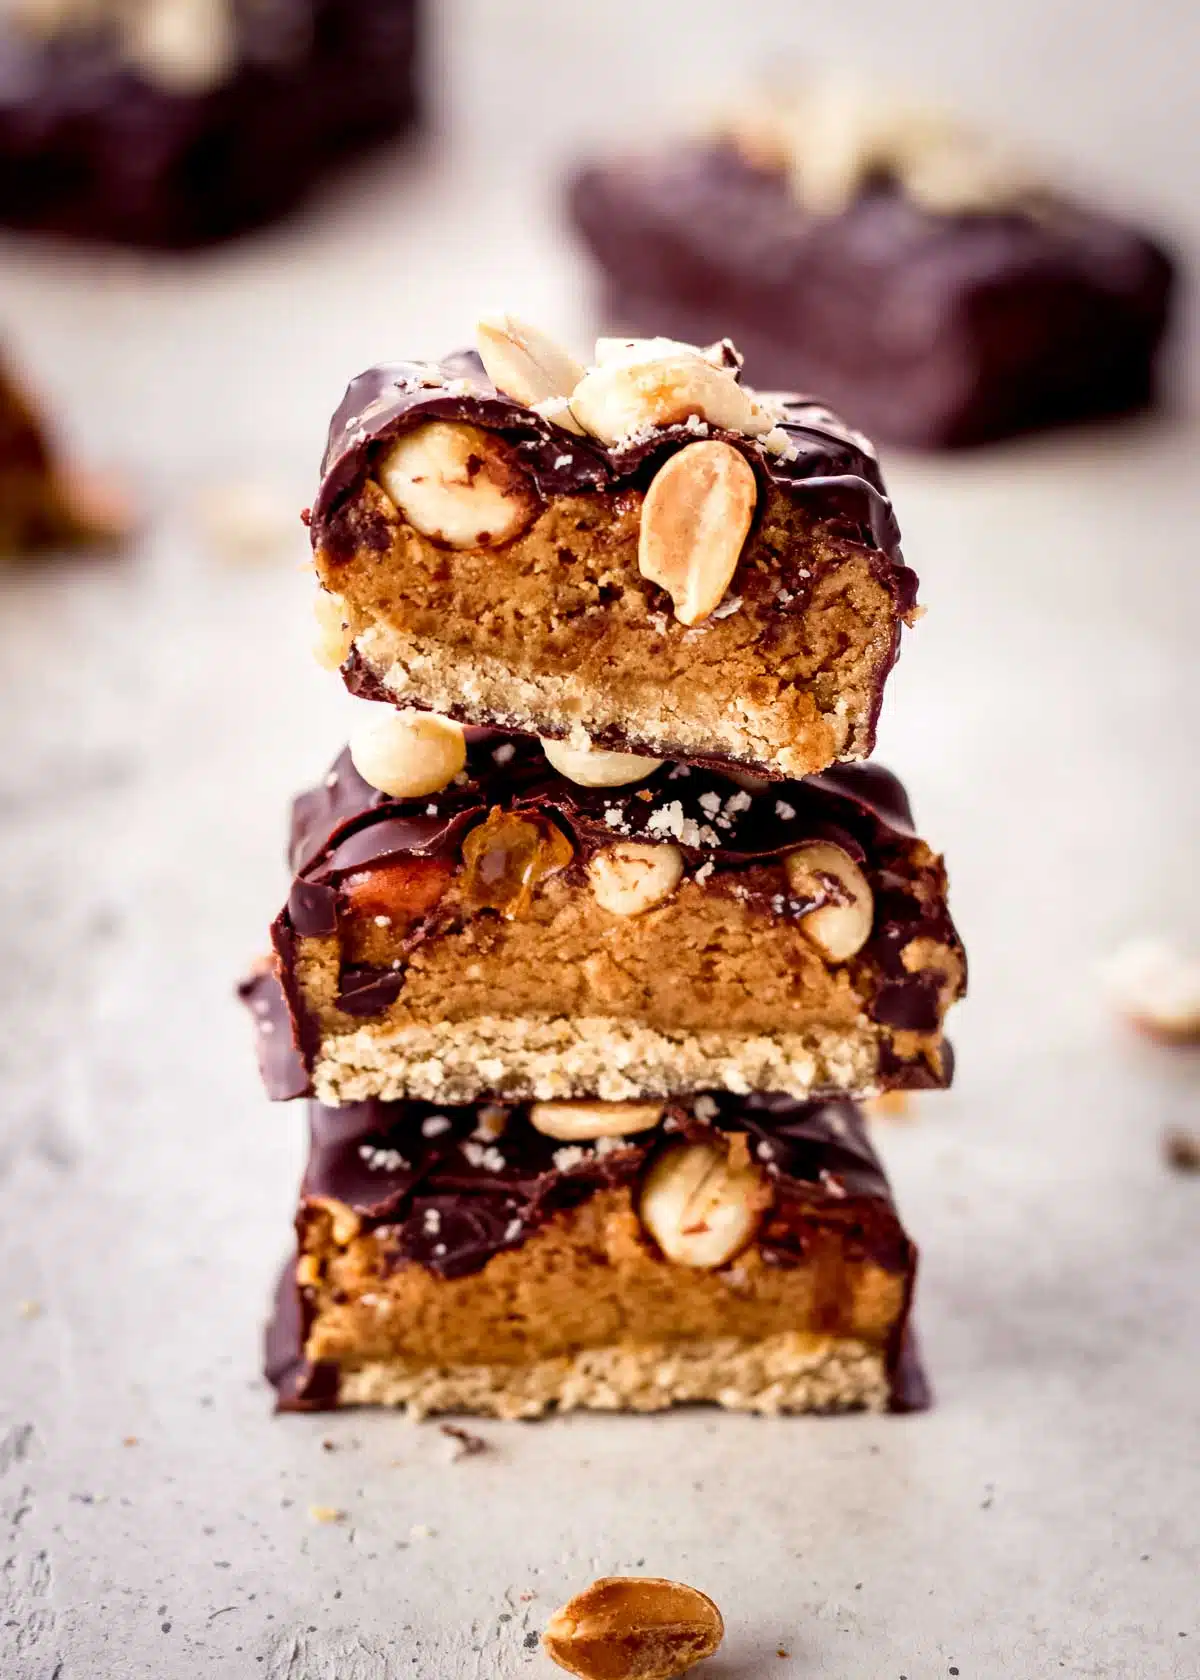 Three homemade vegan snickers bars are stacked together. They are covered in dark chocolate and peanuts are visible.